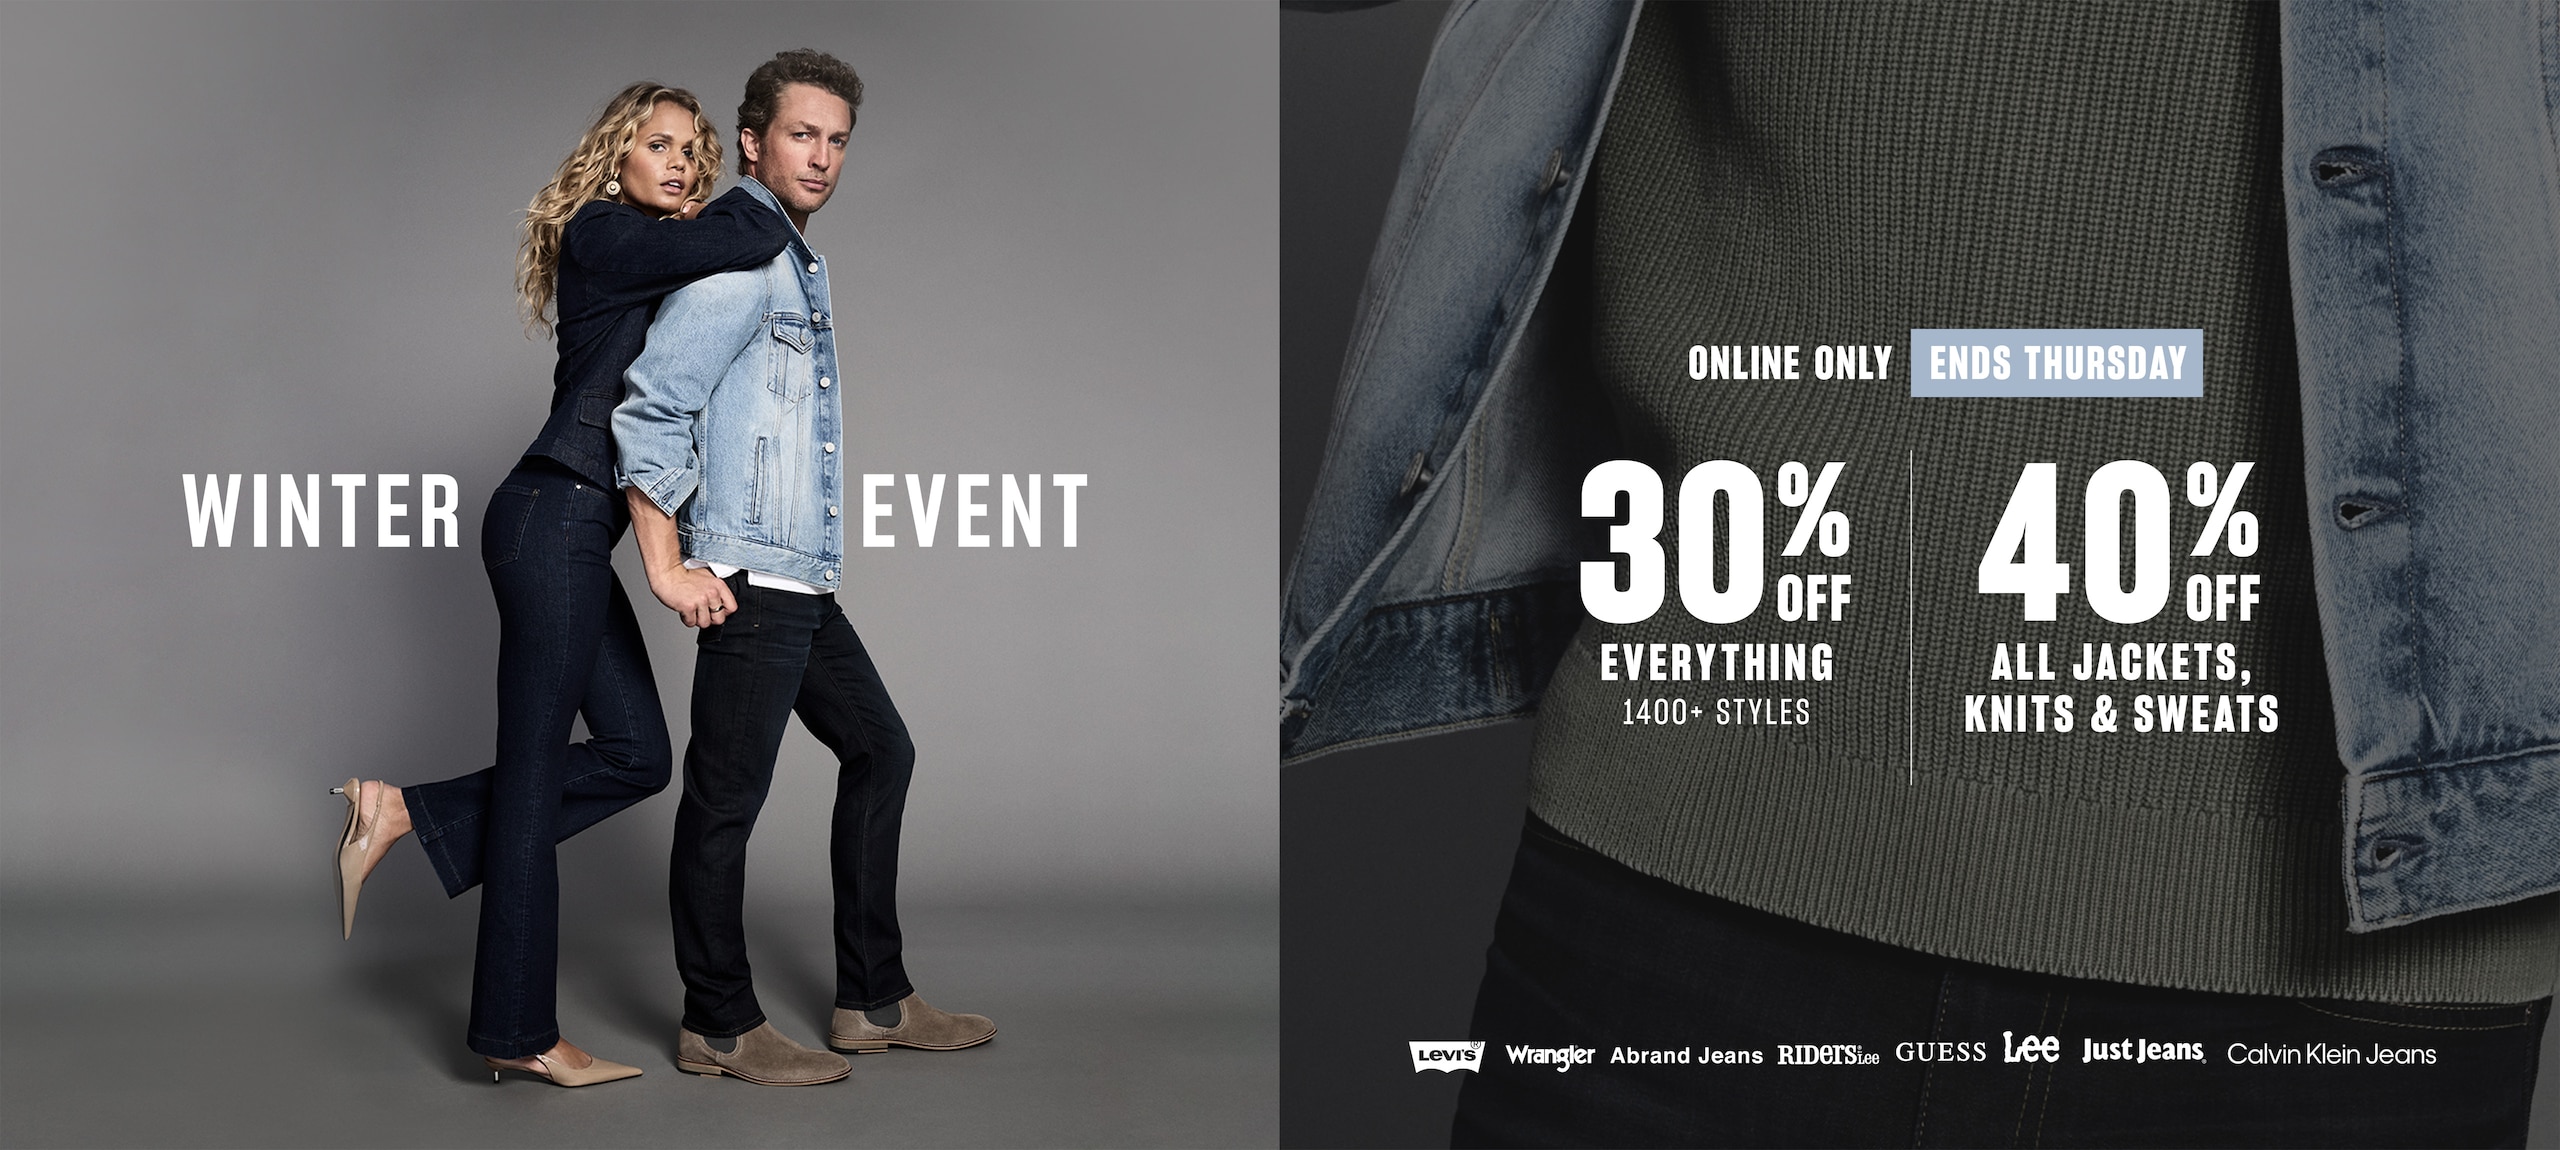 Winter Event. Online only, ends Thursday. 30% off Everything. 40% off Jackets, Knits & Sweats.